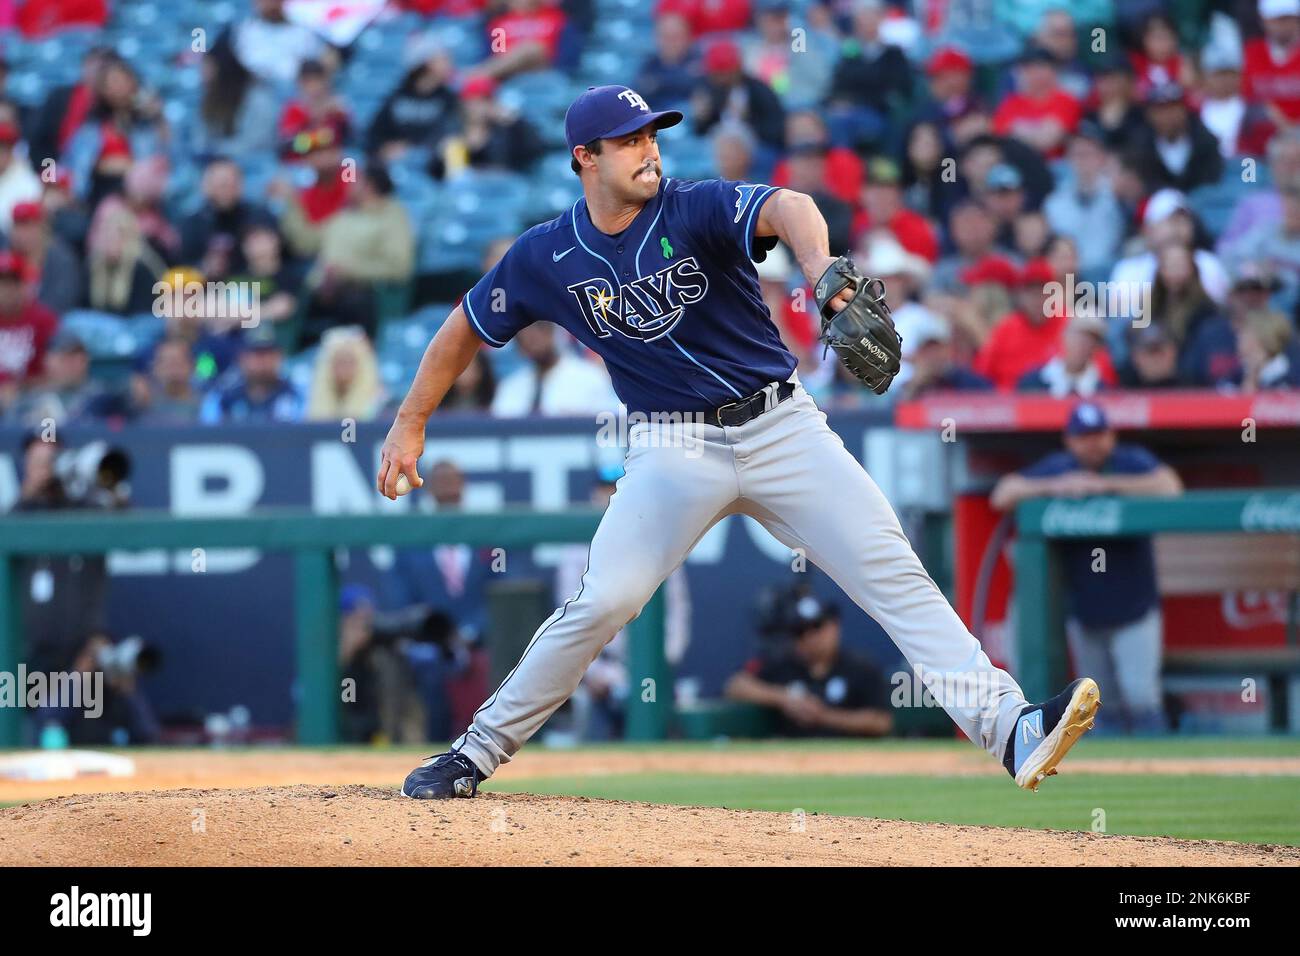 Tampa Bay Rays pitcher J.P. Feyereisen (34) during an MLB baseball game  against the Boston Red Sox on June 22, 2021 at Tropicana Field in St.  Petersburg, Florida. (Mike Janes/Four Seam Images